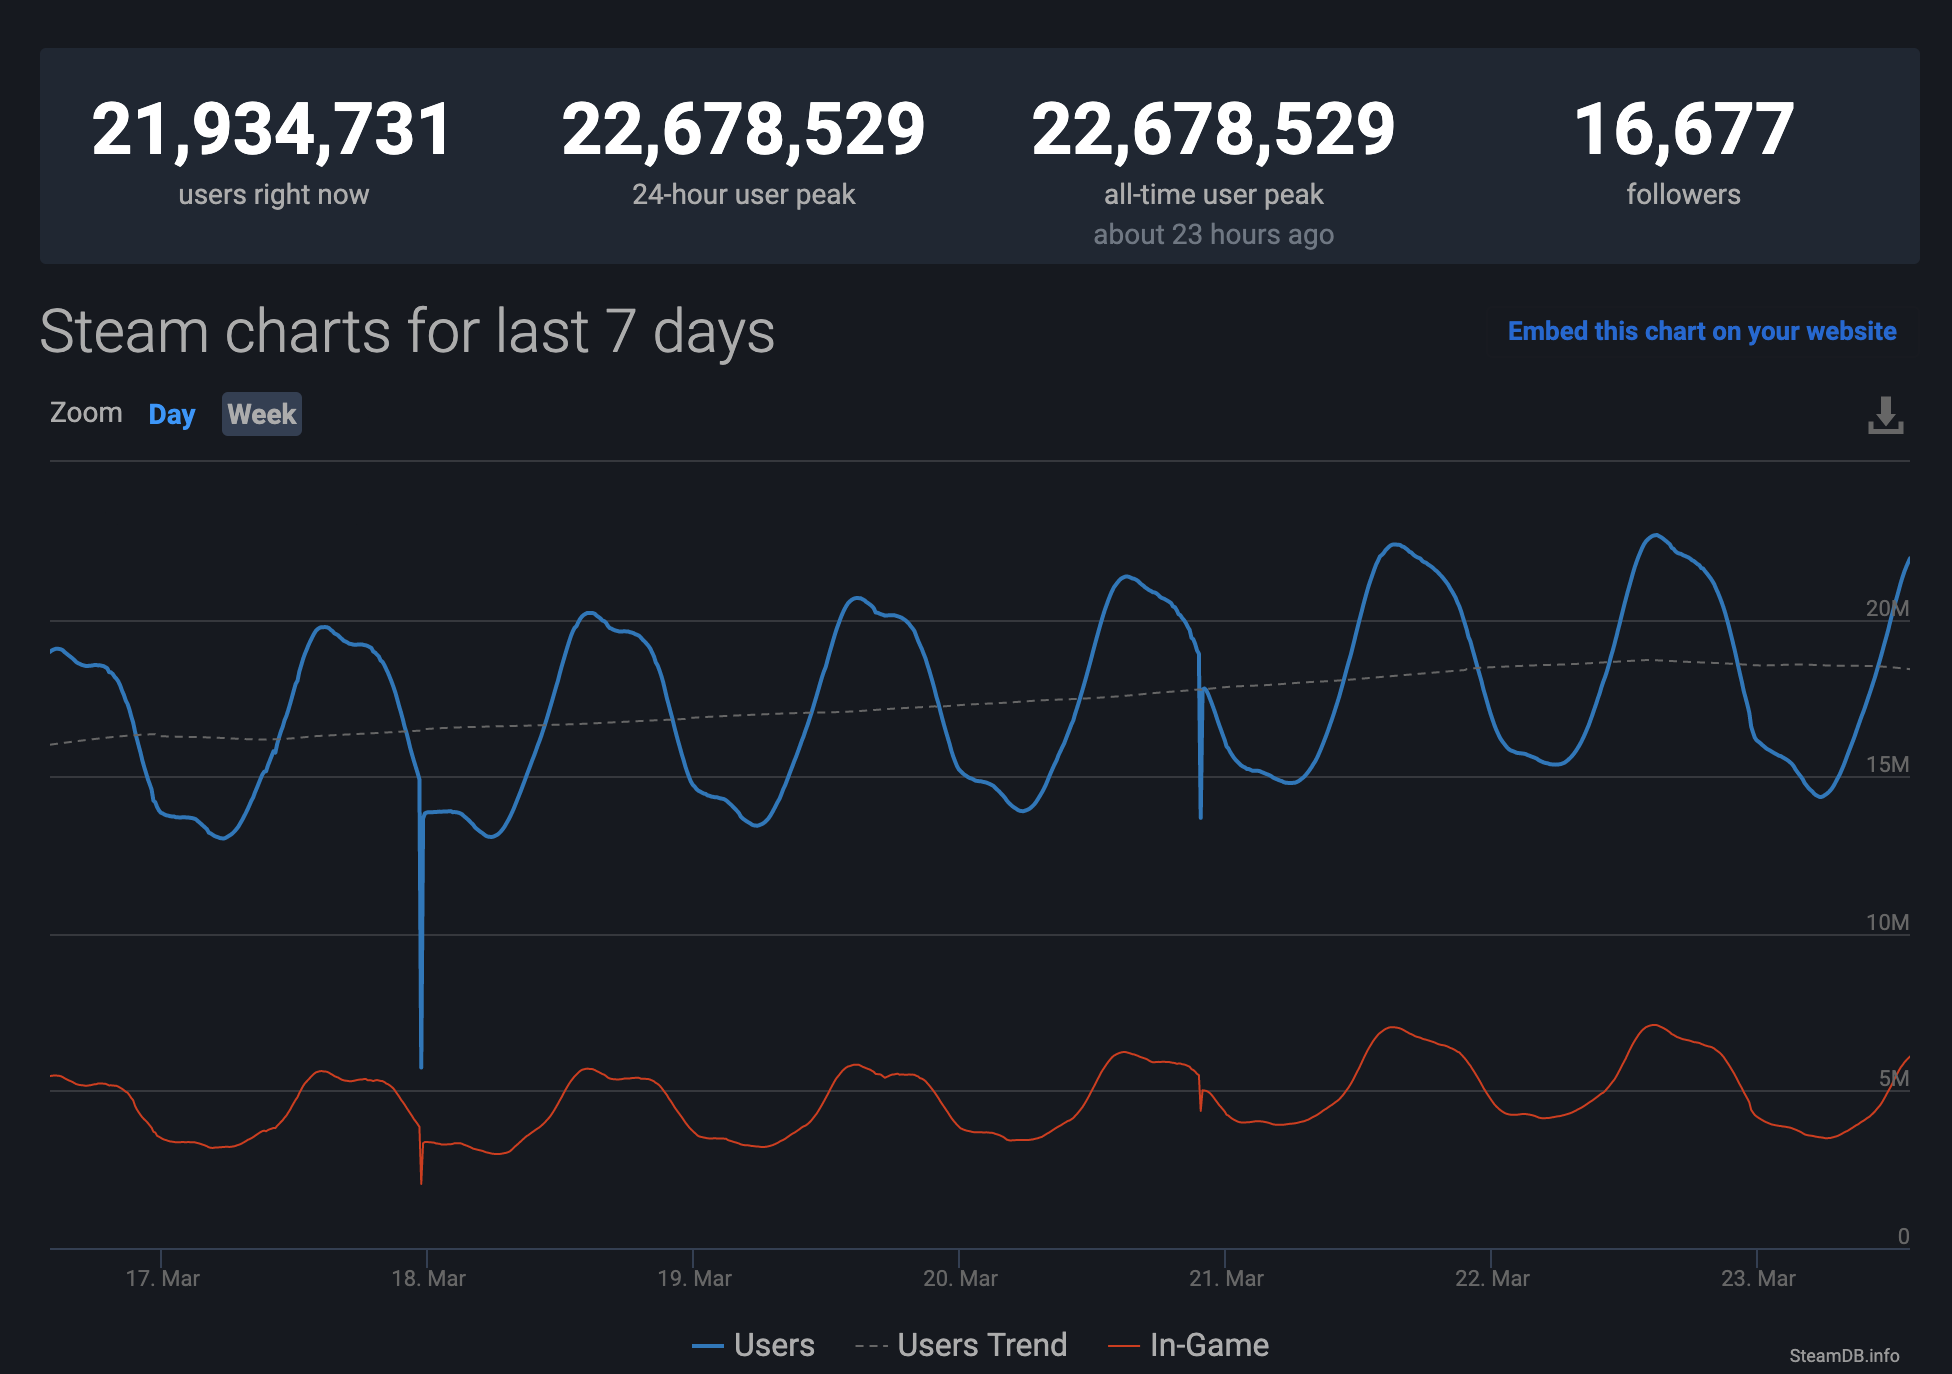 Steam has broken another concurrent user record again with 22 million